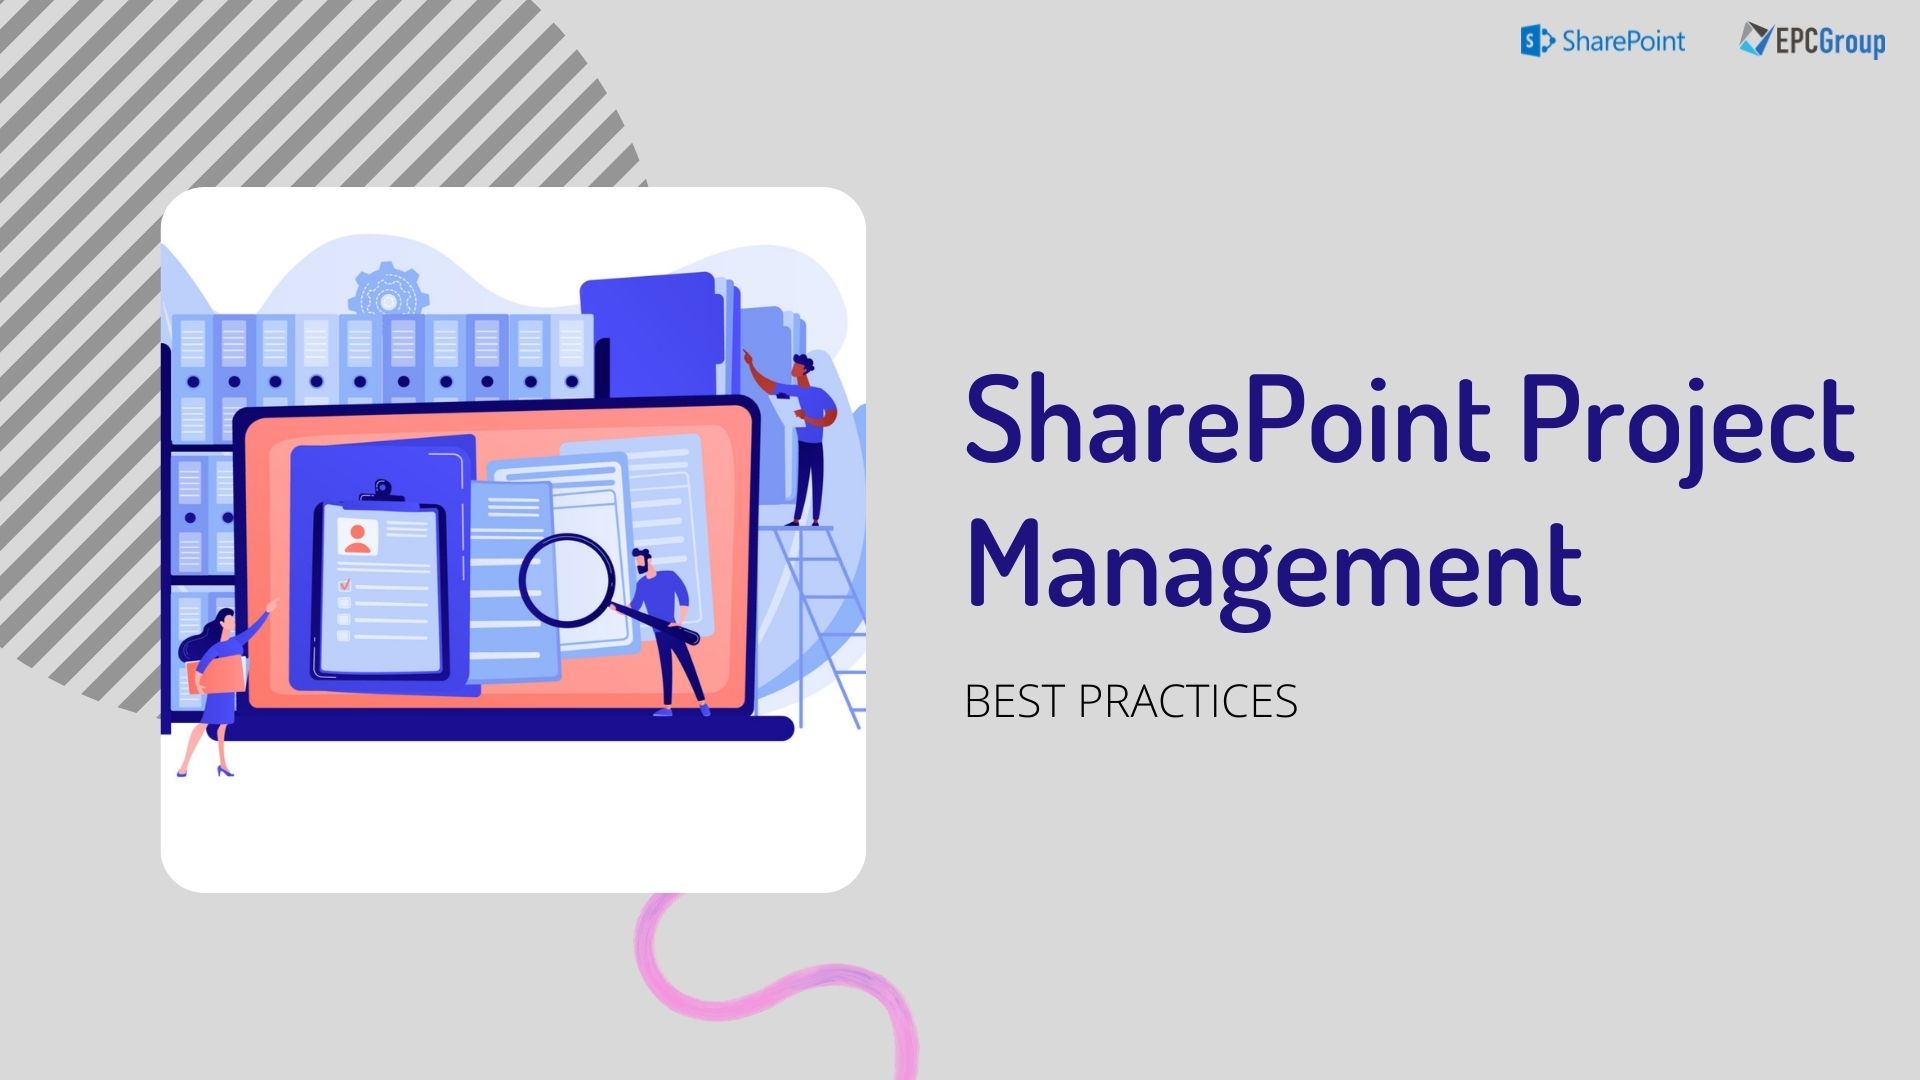 10 Best Practices To Use SharePoint For Project Management - thumb image